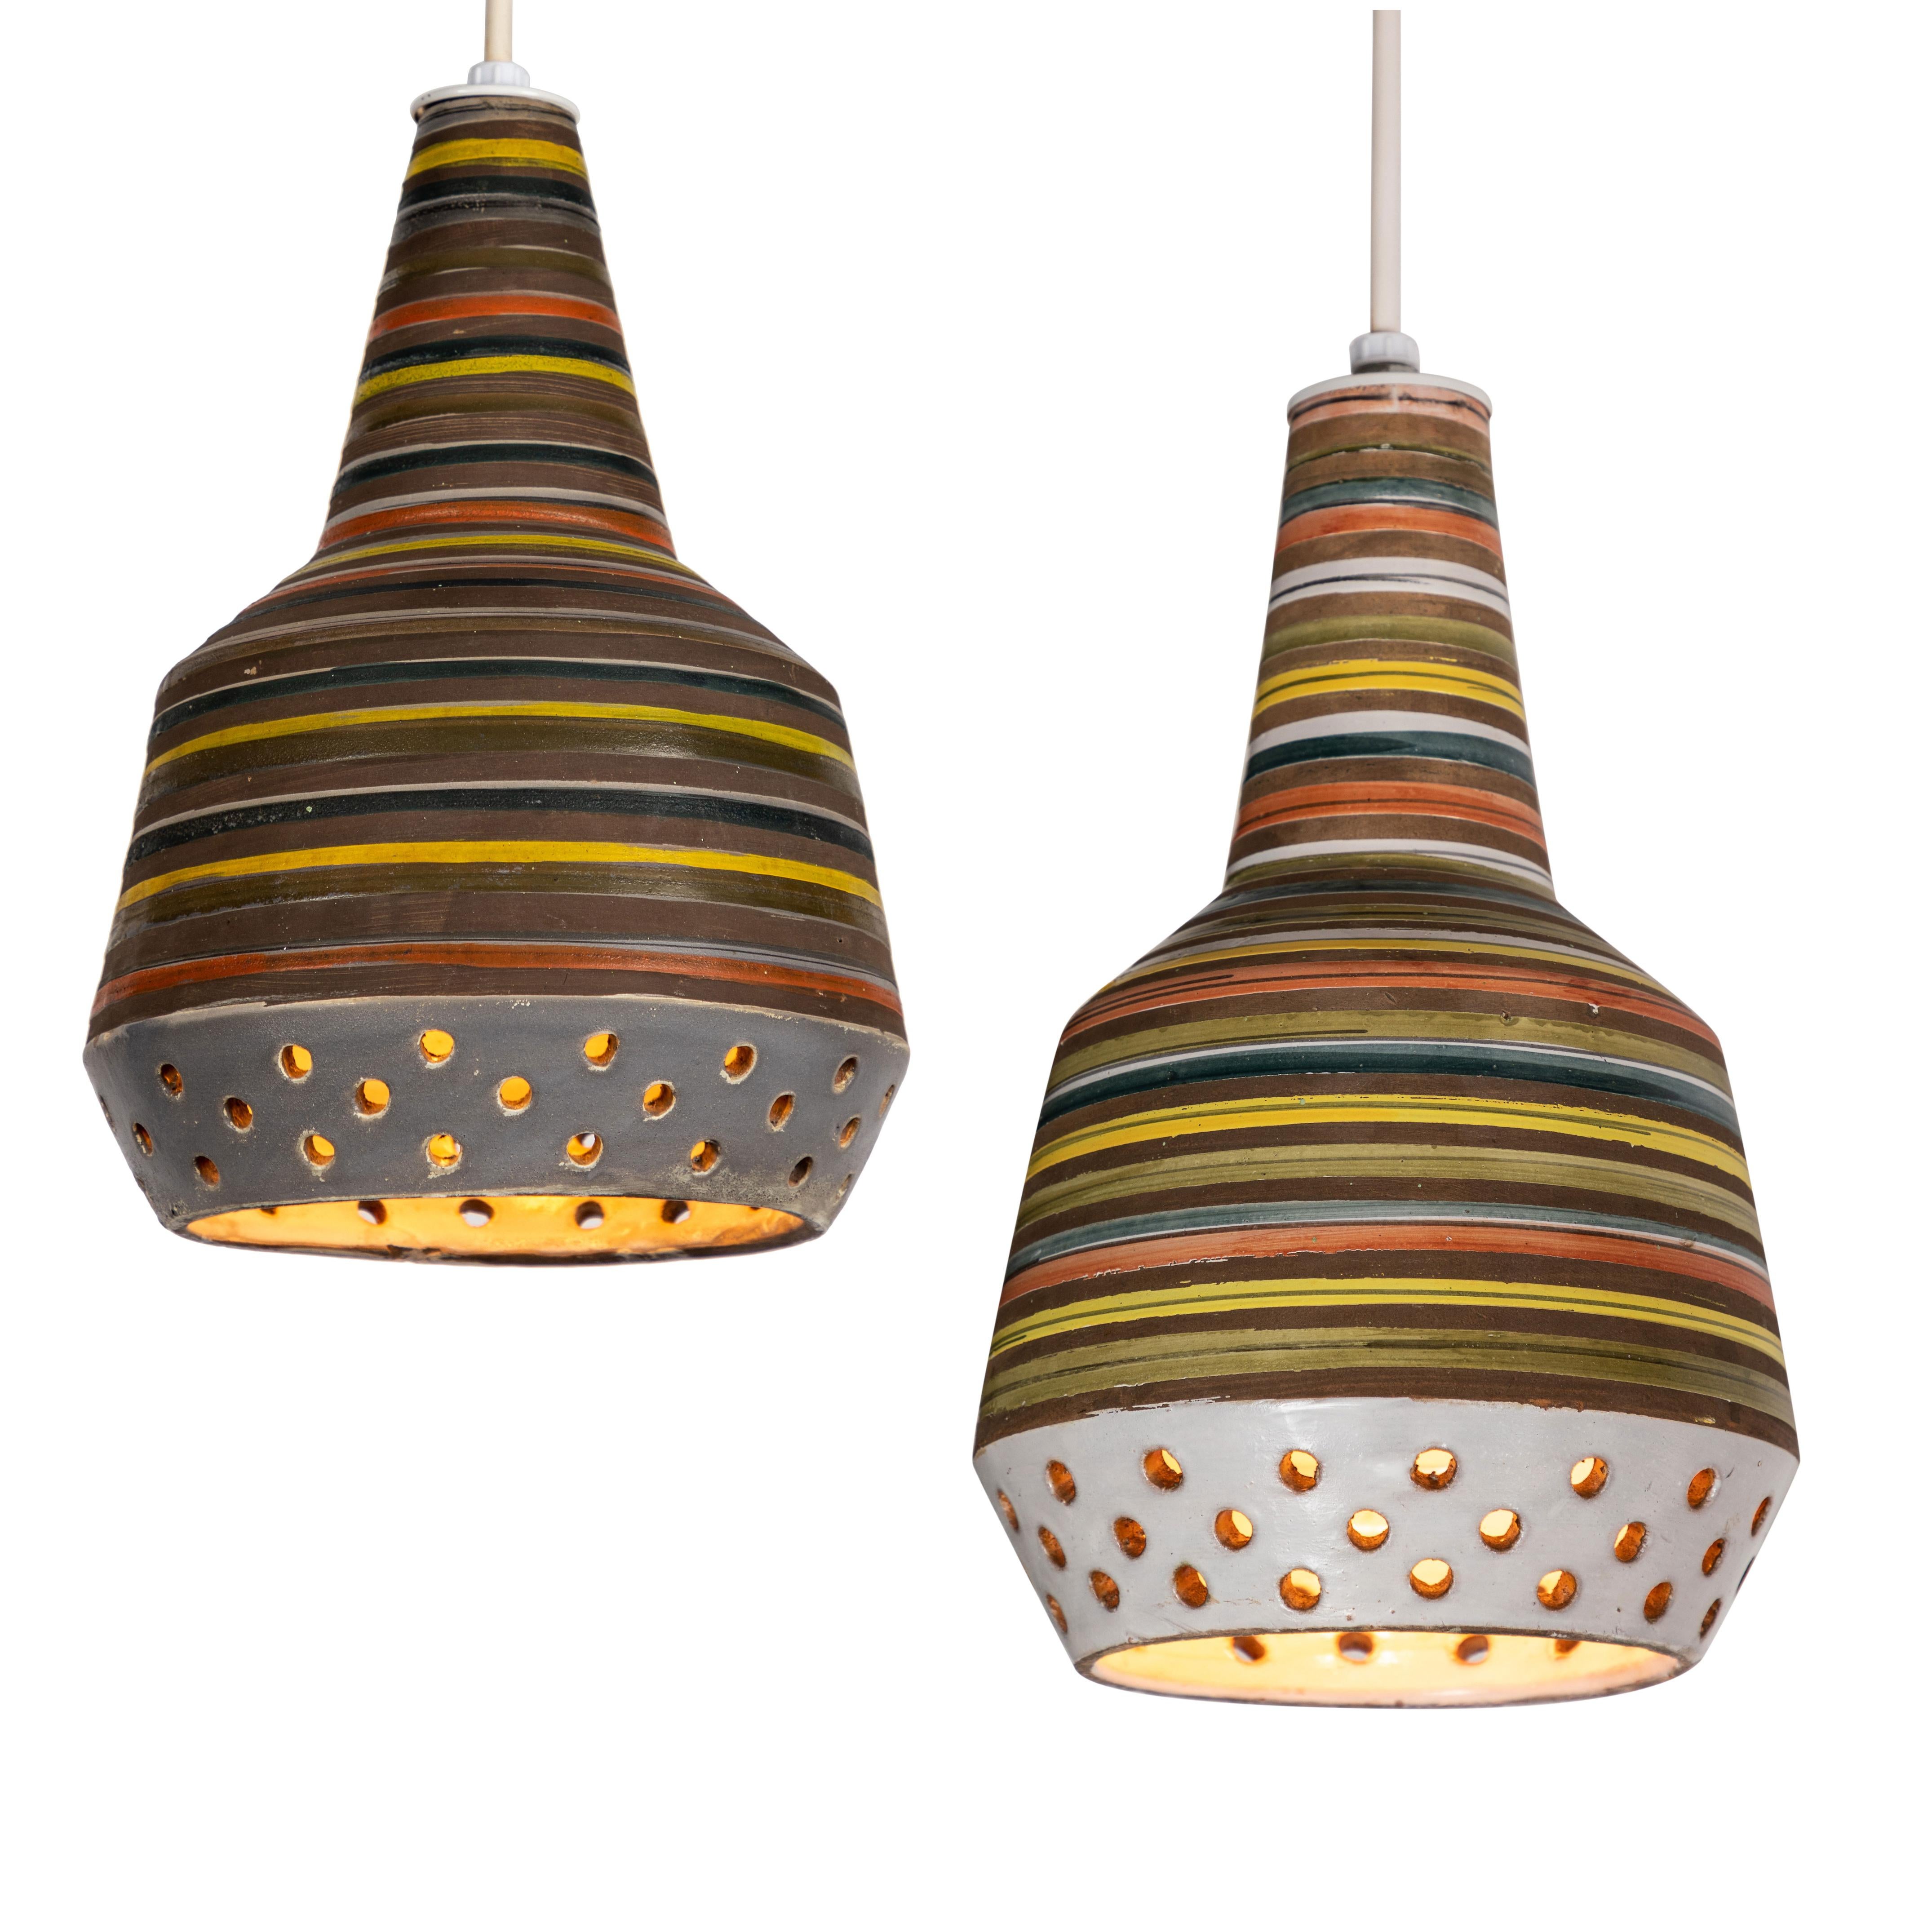 1950s Aldo Londi ceramic Bitossi pendant lamp for Italian Raymor. This rare and sculptural Italian ceramic lamp is executed with multi colored glazed horizontal stripes and geometric circular perforations. 

Only one available in this coloration.